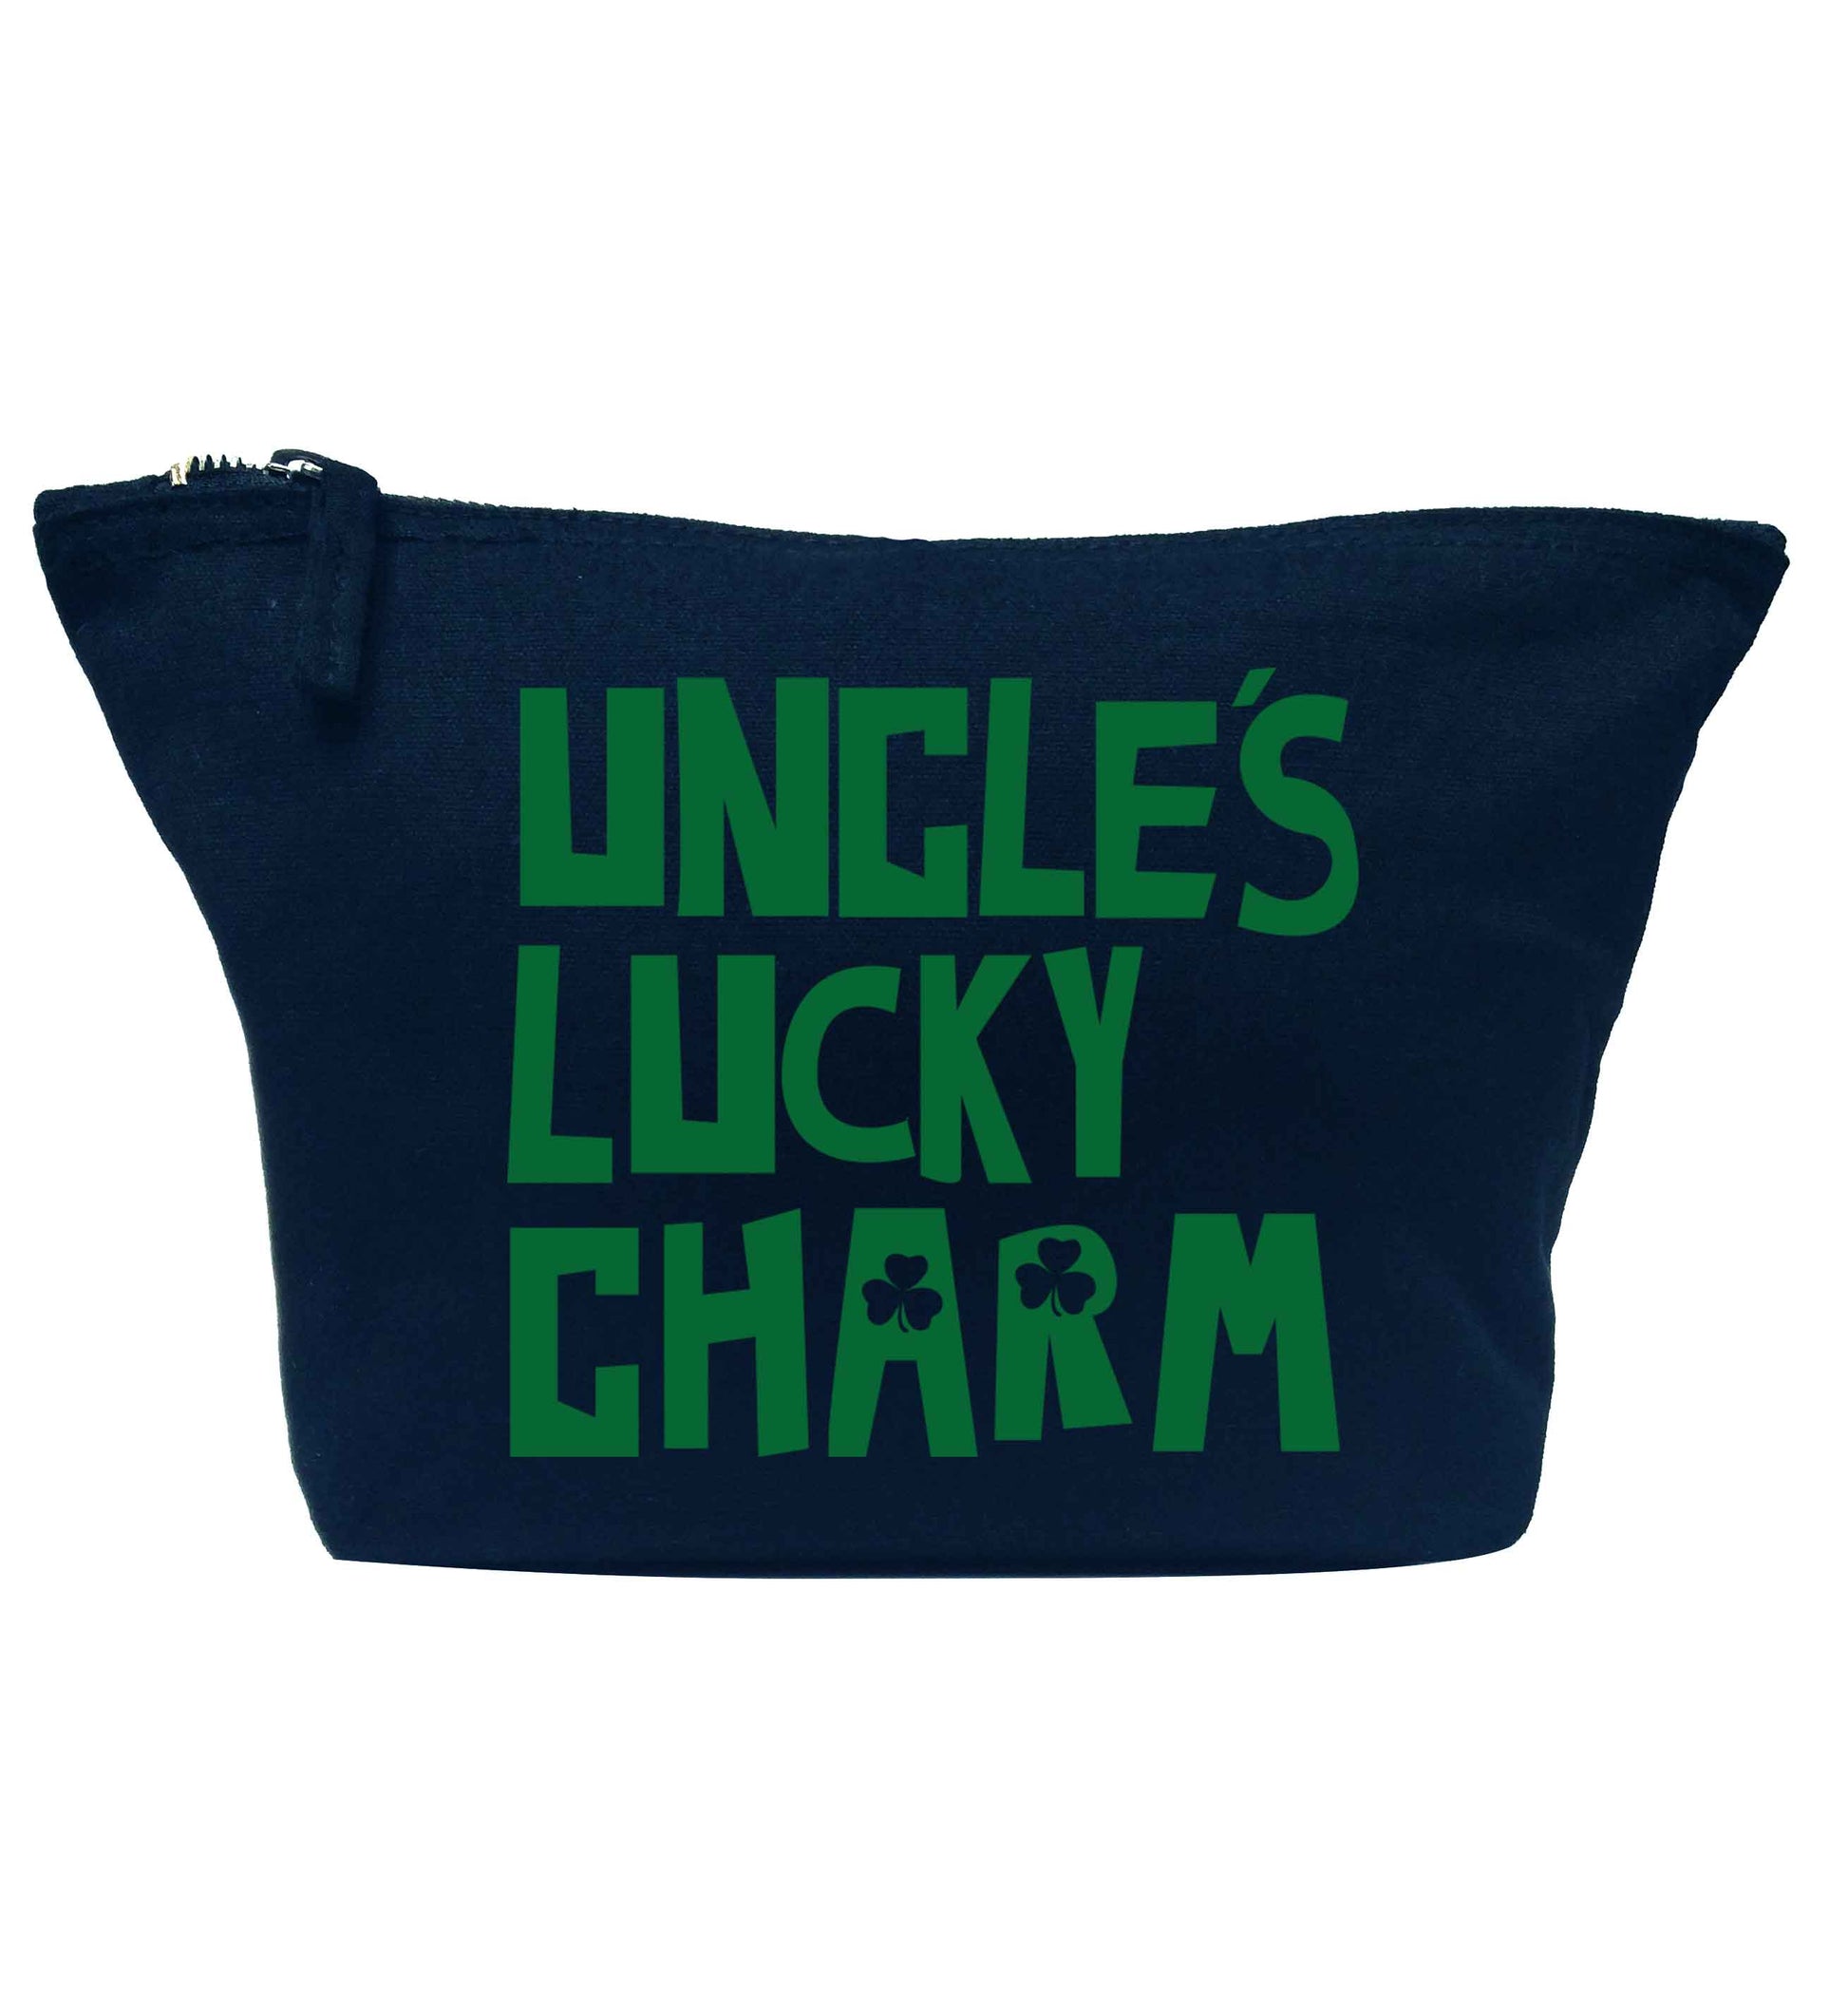 Uncles lucky charm navy makeup bag